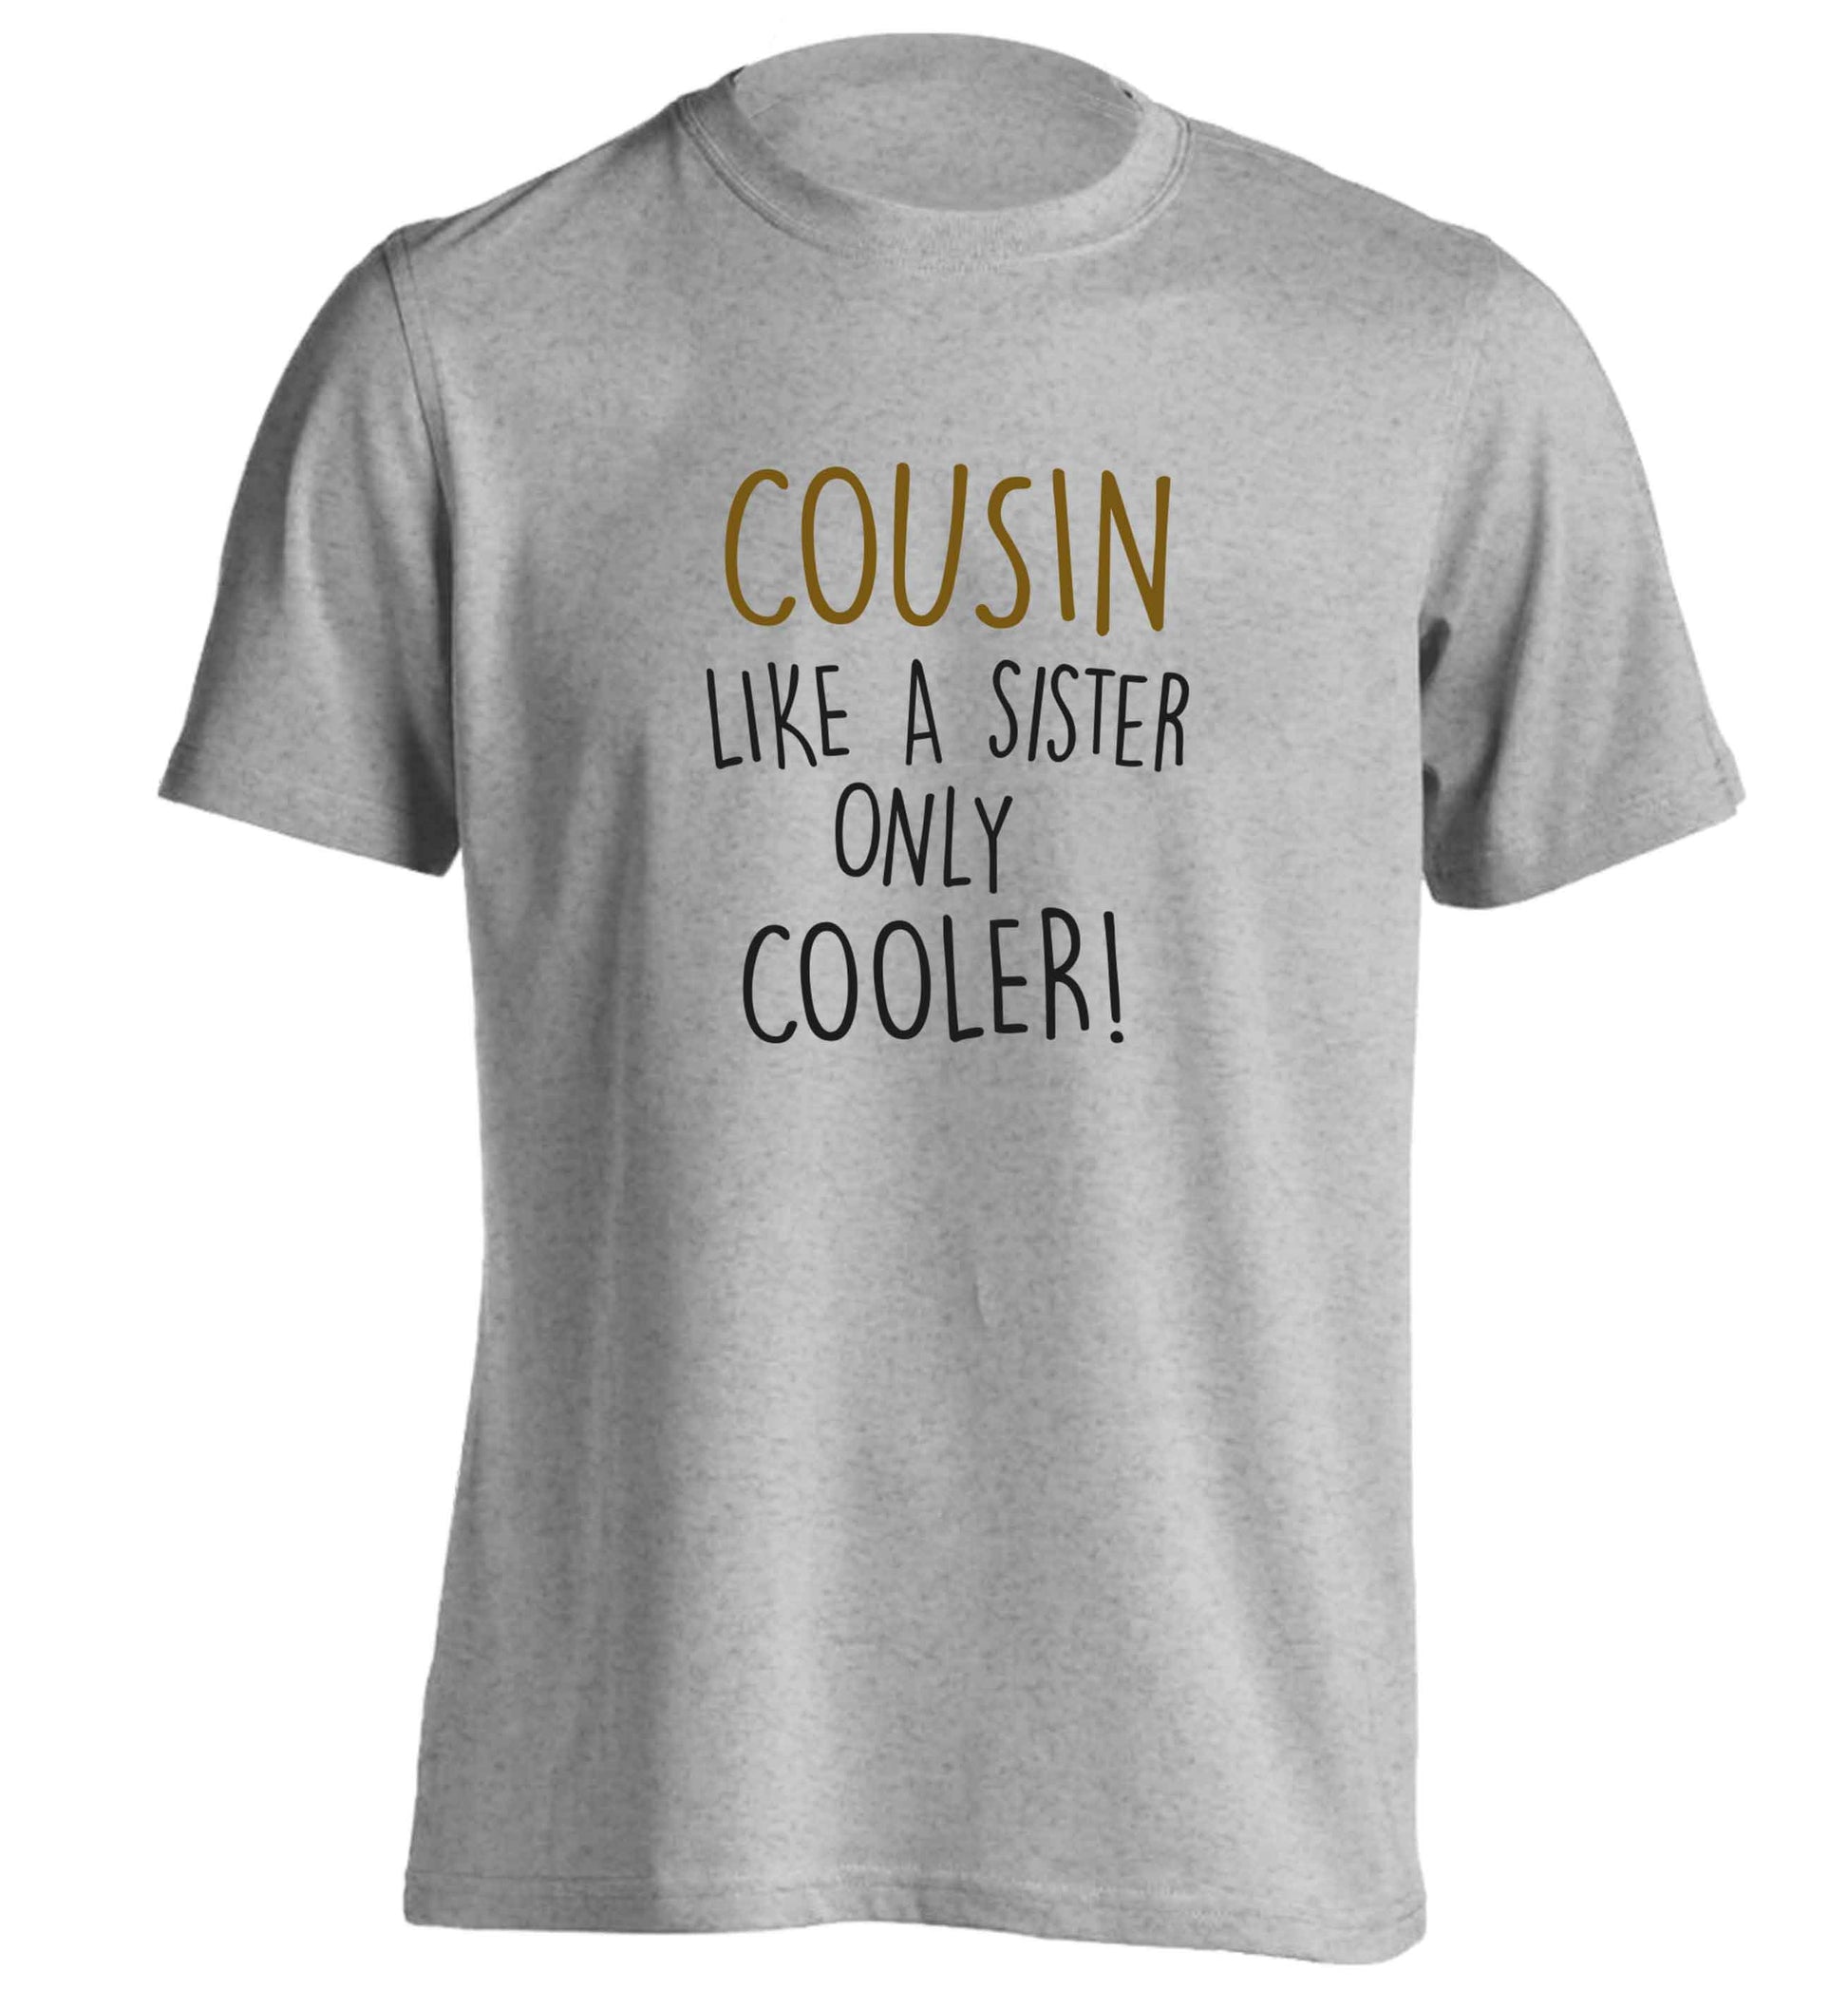 Cousin like a sister only cooler adults unisex grey Tshirt 2XL